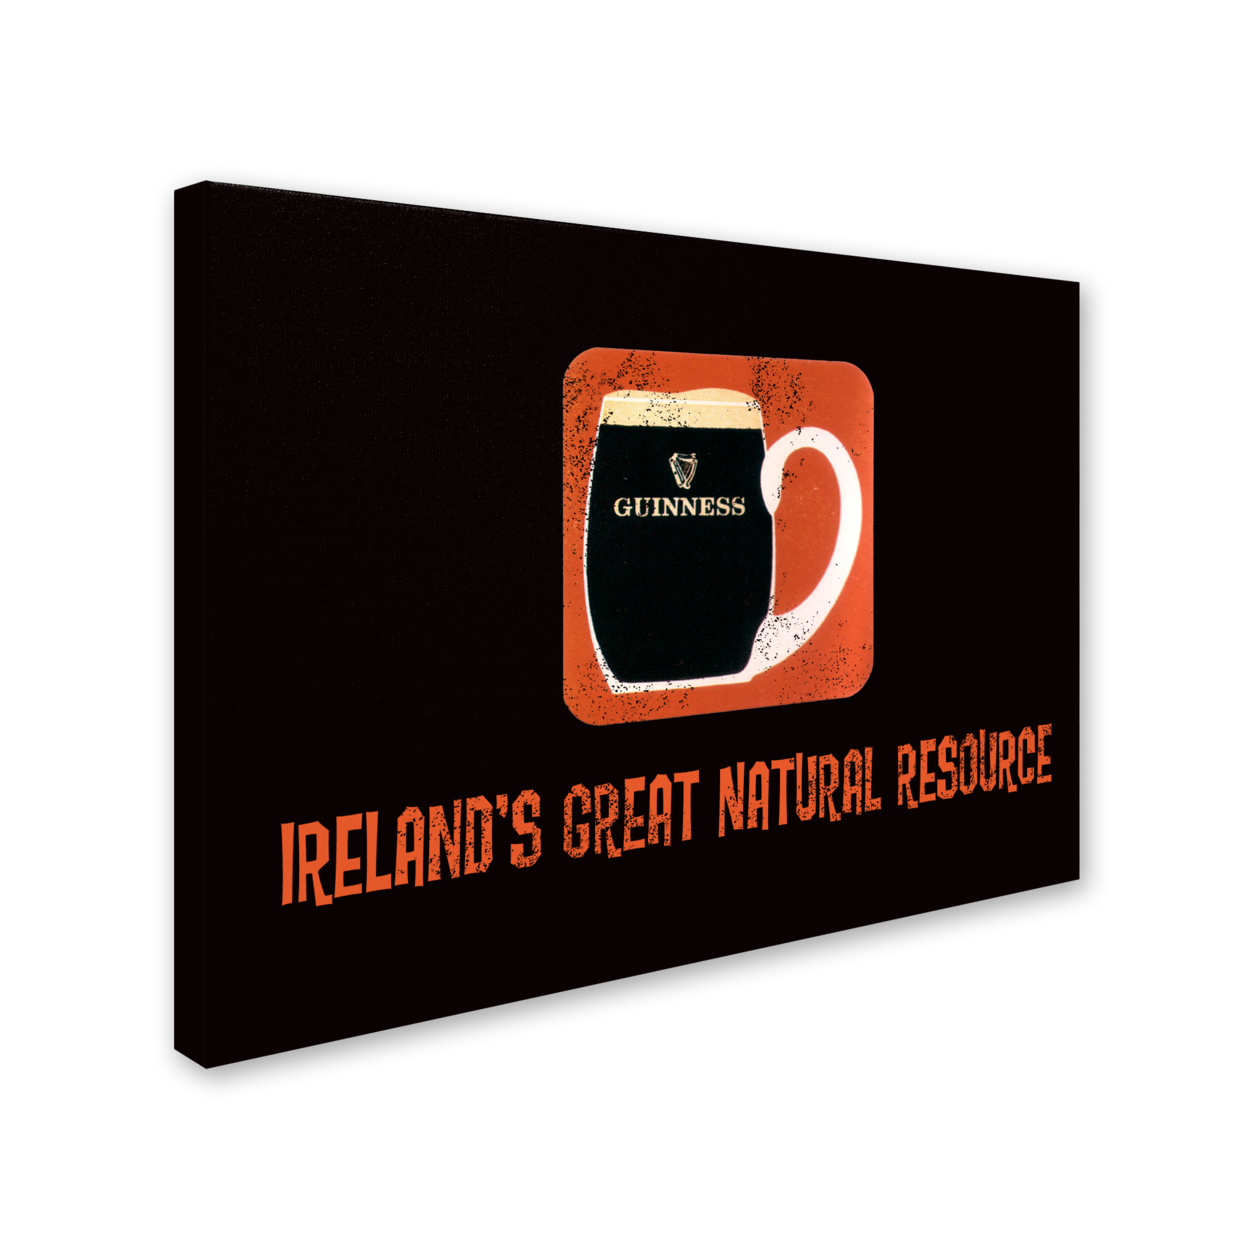 Guinness Brewery 'Ireland's Great Natural Resource' 14 X 19 Canvas Art